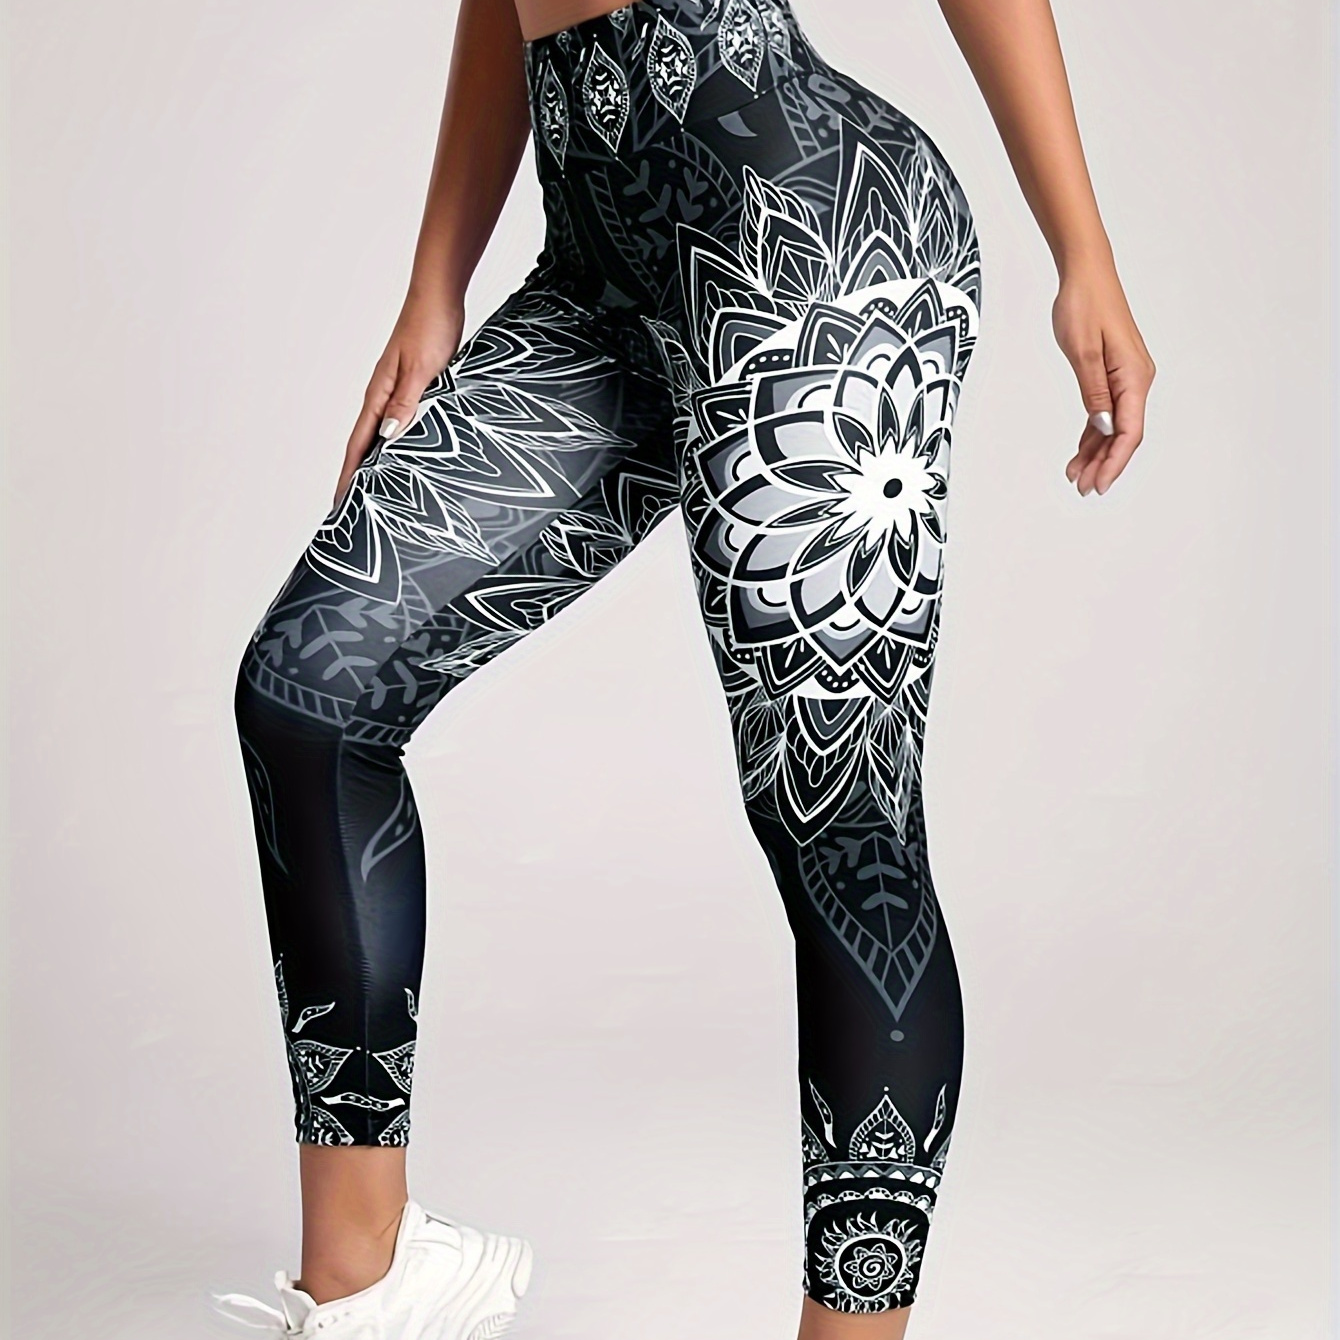 

Women's High-waisted Kaleidoscope Print Leggings, Sports Fitness Yoga Pants With Tummy Control And Butt Lift, Fashion Tight Long Trousers For Running Cycling